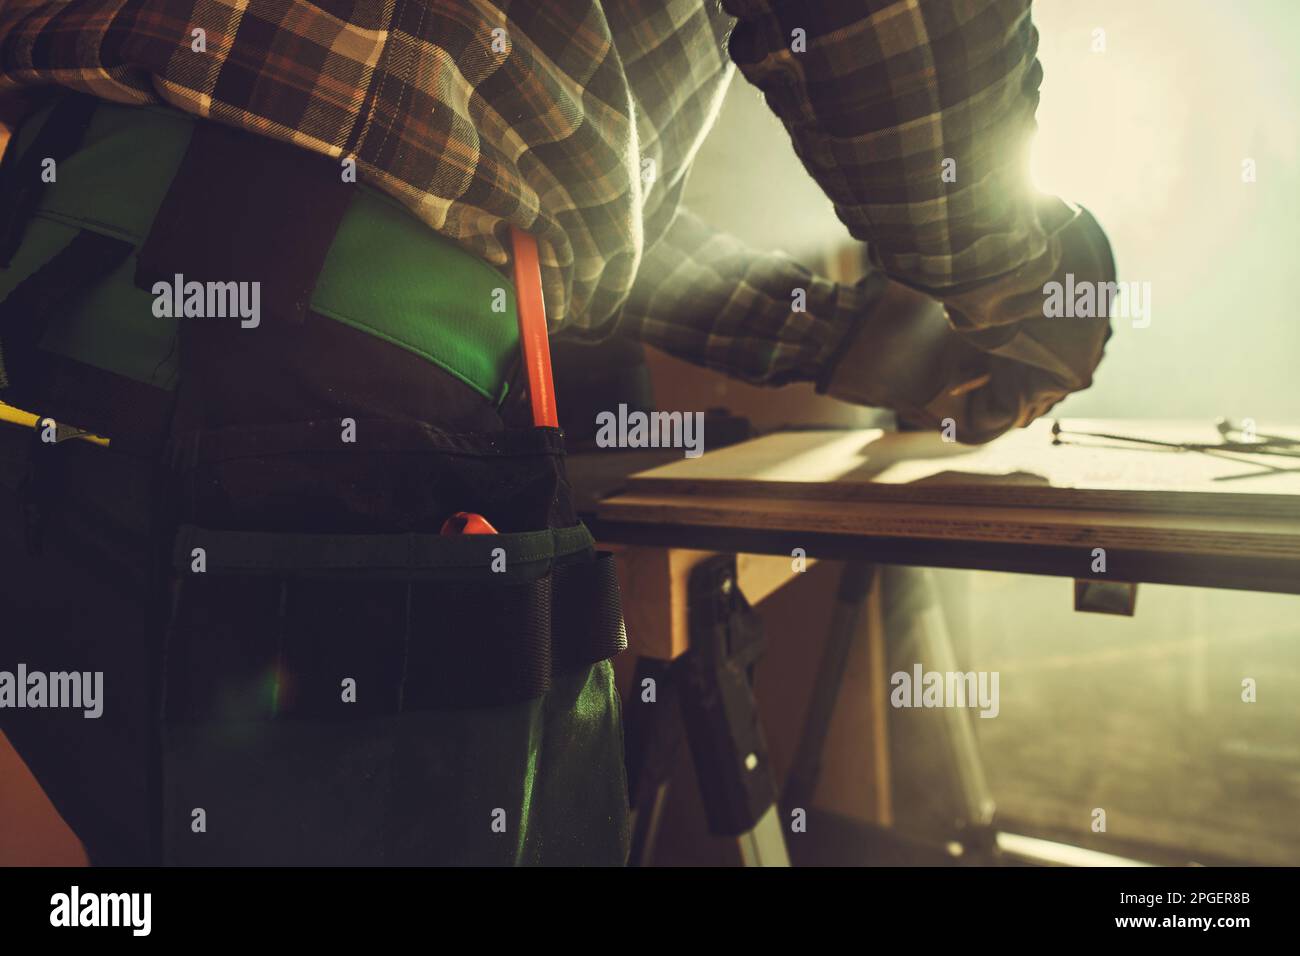 Handyman Working Inside His Small Workshop Close Up Photo. Small Construction Job. Stock Photo